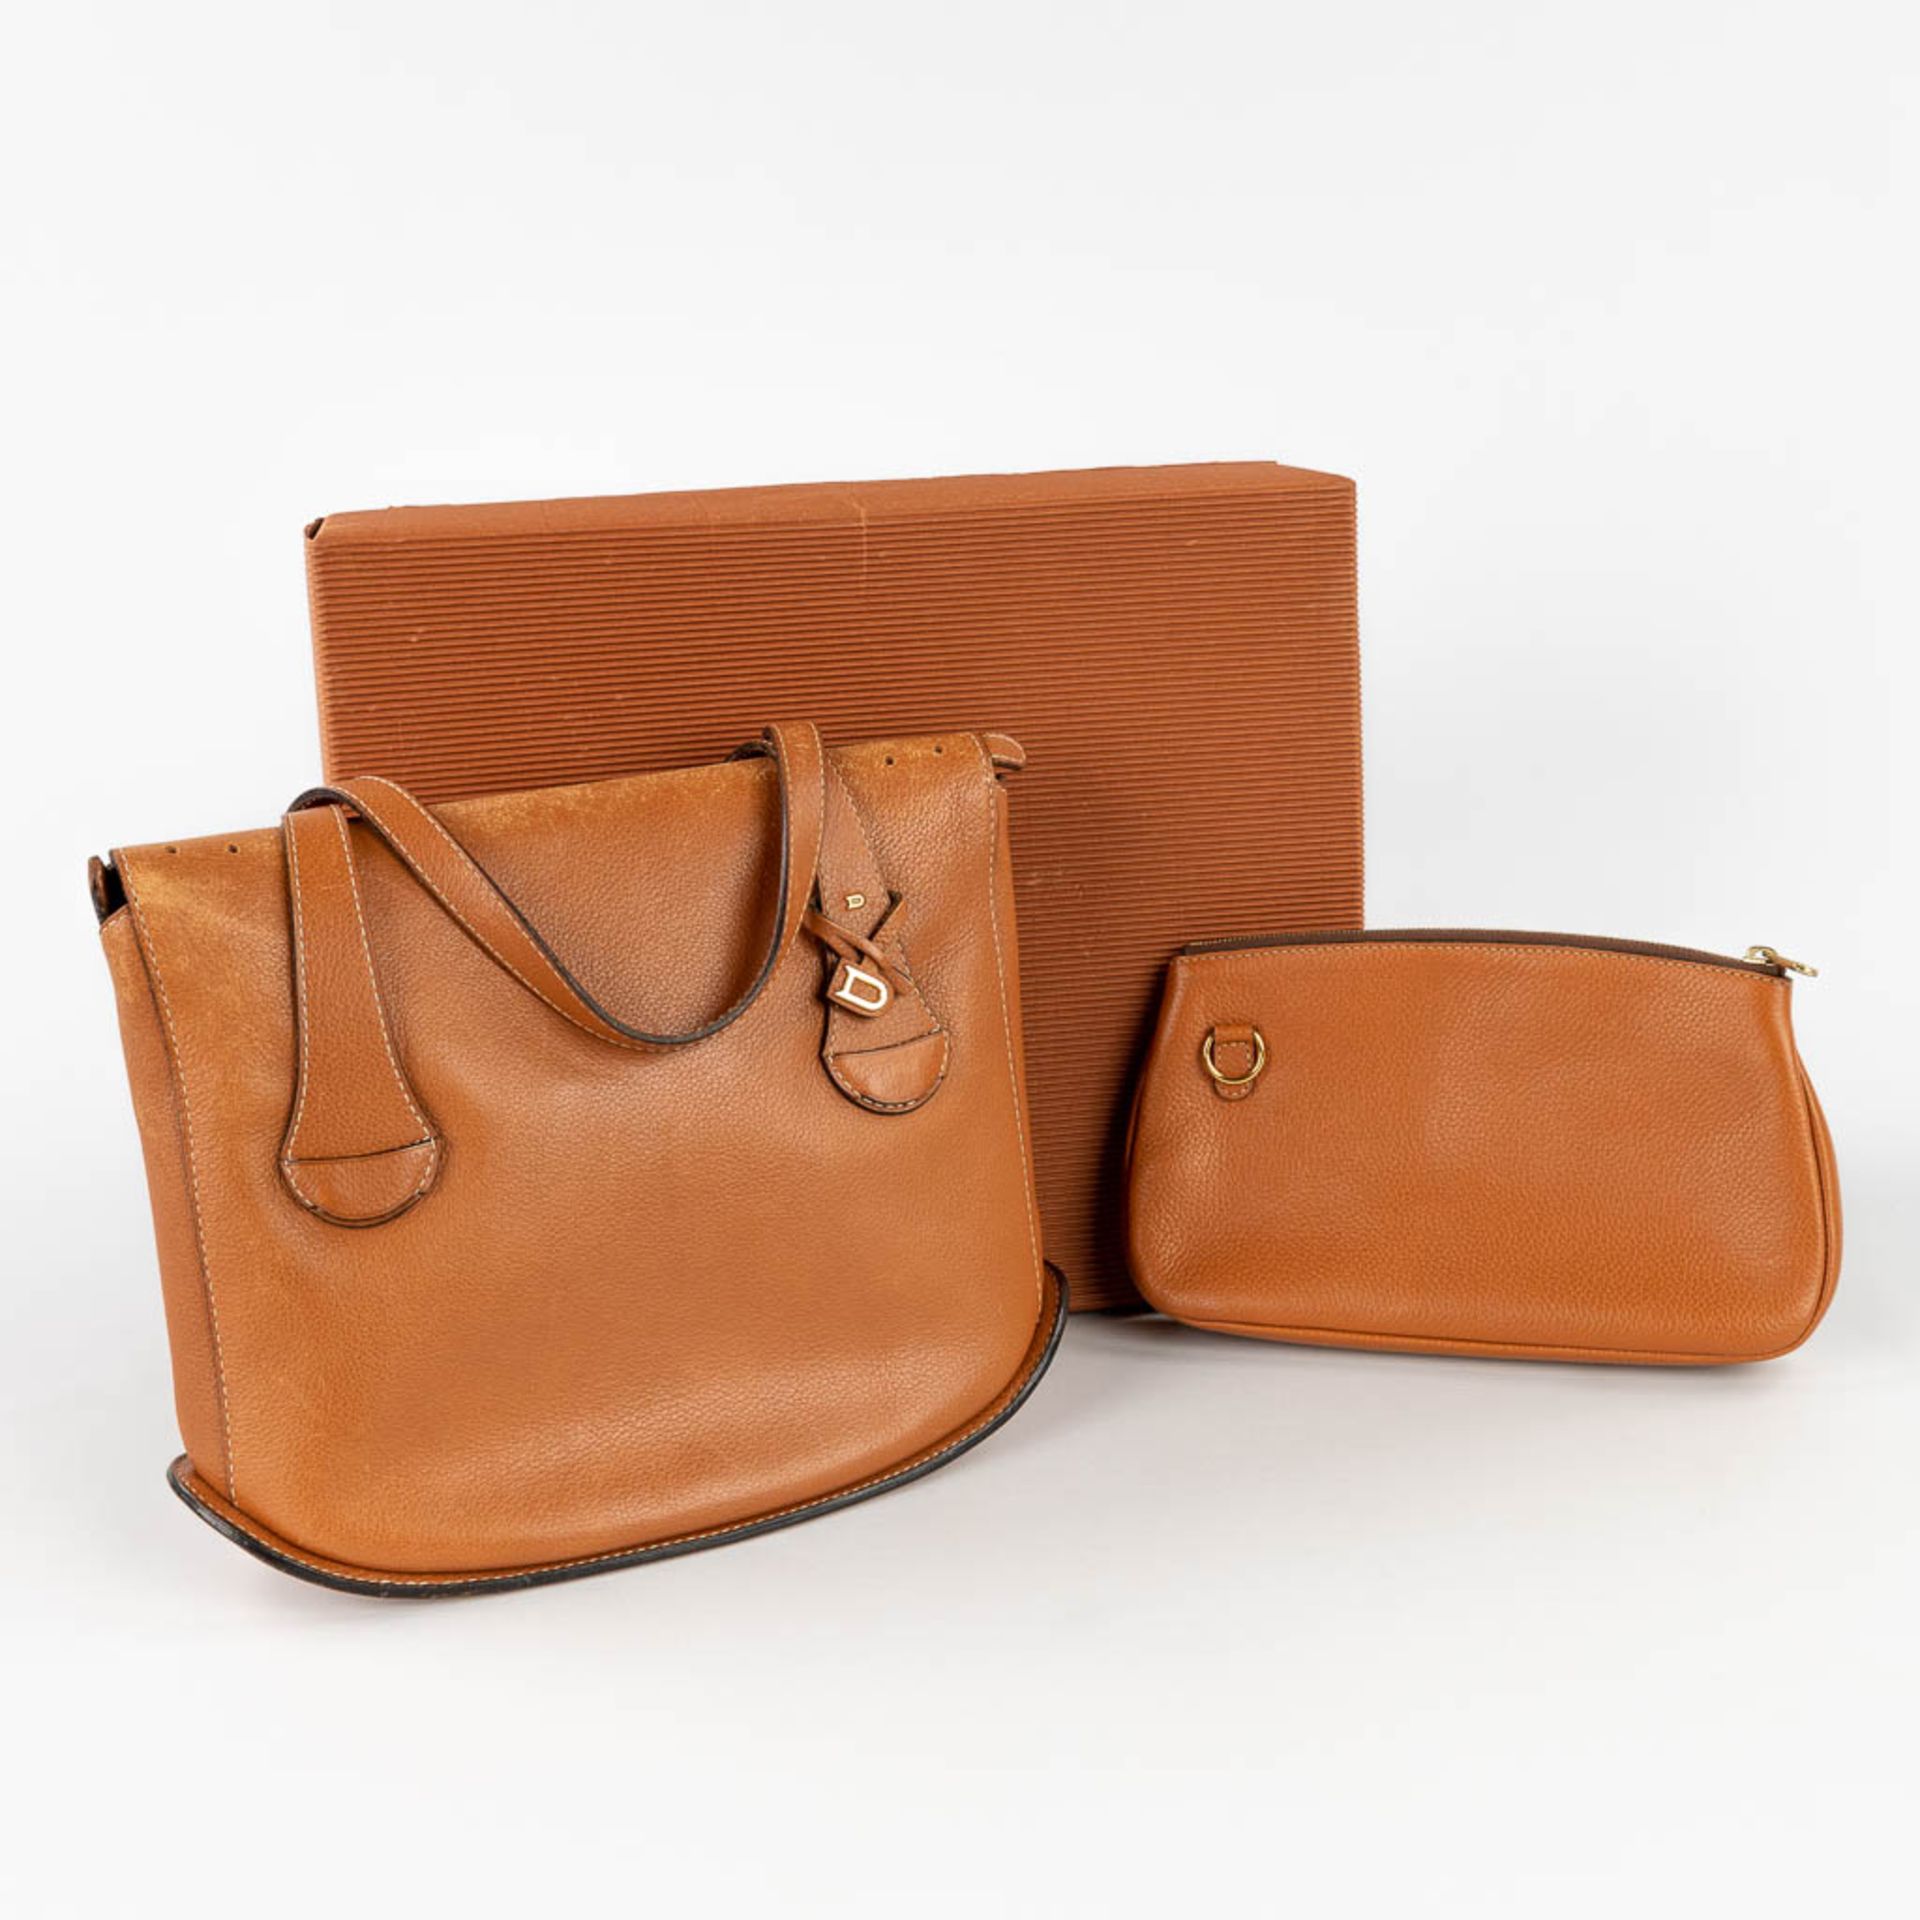 Delvaux Memoire PM, with the original purse, made of cognac-coloured leather. (L: 10 x W: 26 x H: 20